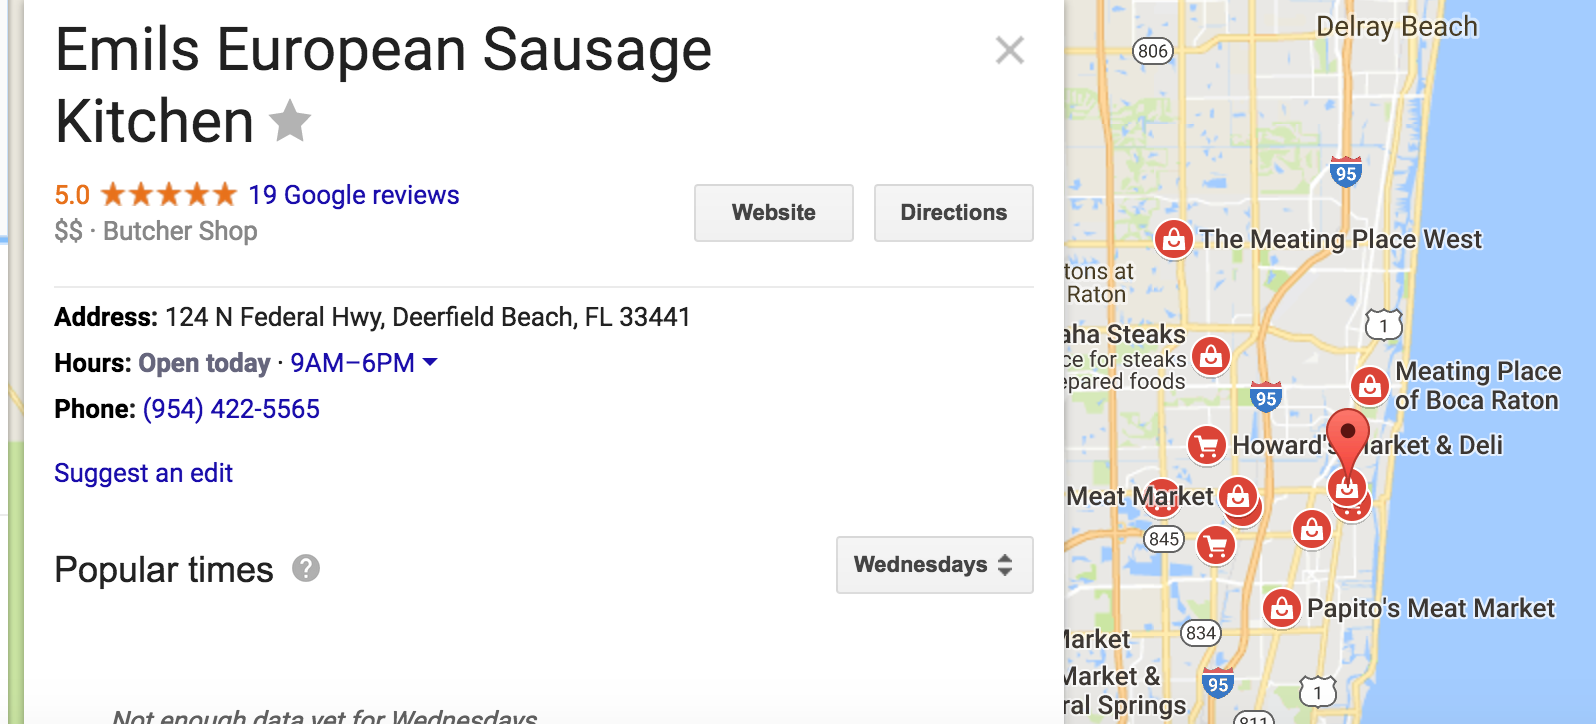 How Exactly Did 7 Kilograms Of Meat End Up On A Roof In Florida? An Investigation